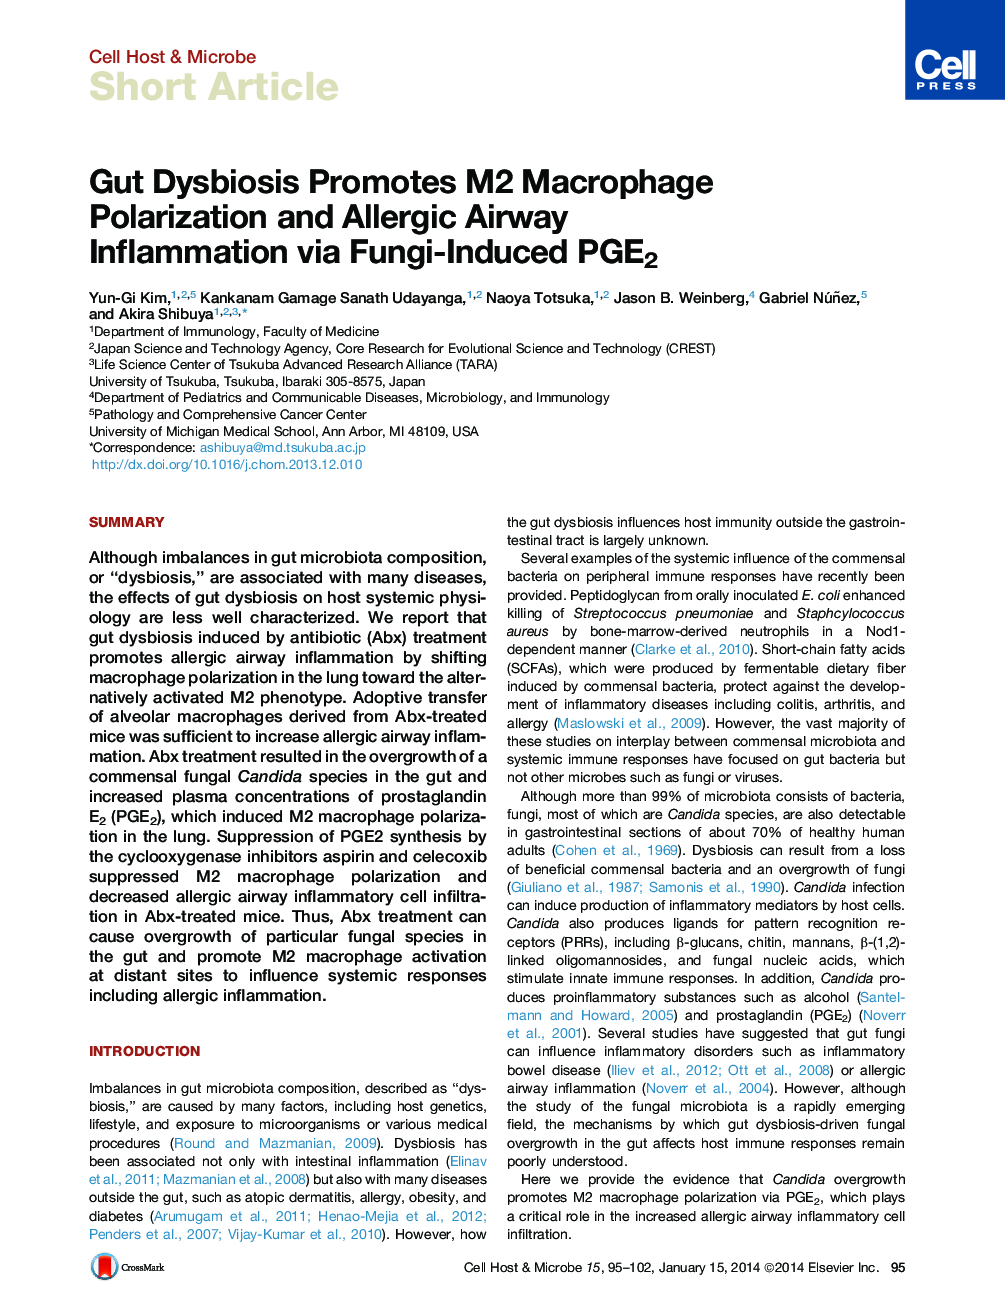 Gut Dysbiosis Promotes M2 Macrophage Polarization and Allergic Airway Inflammation via Fungi-Induced PGE2